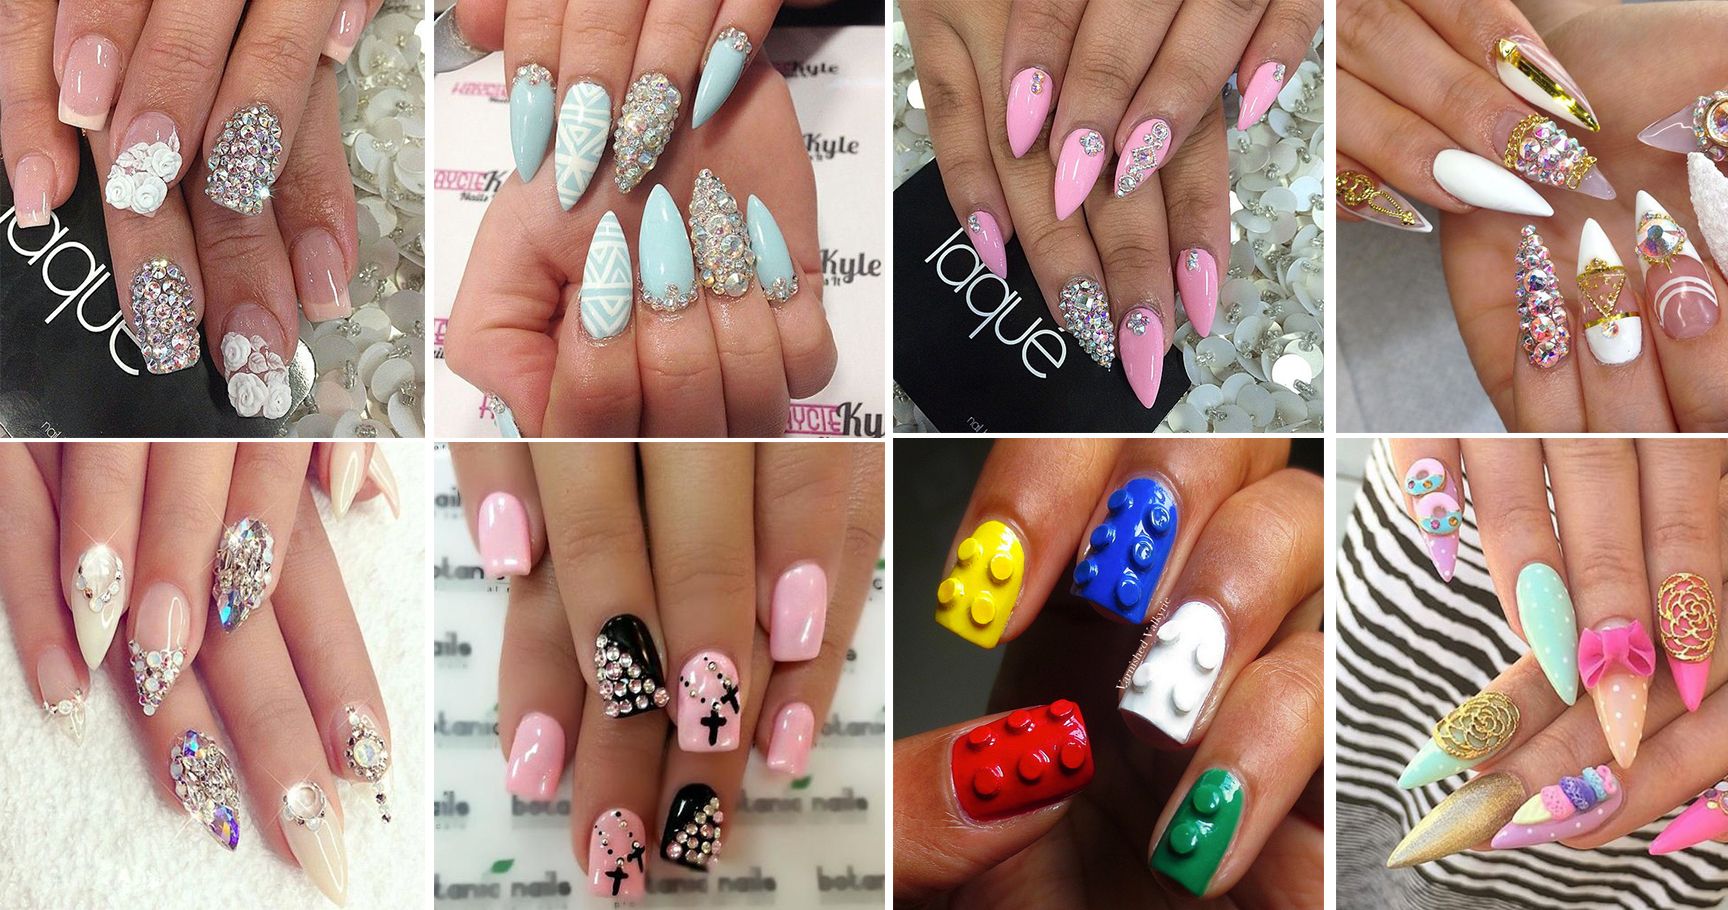 3. Cute and Simple 3D Nail Designs - wide 7